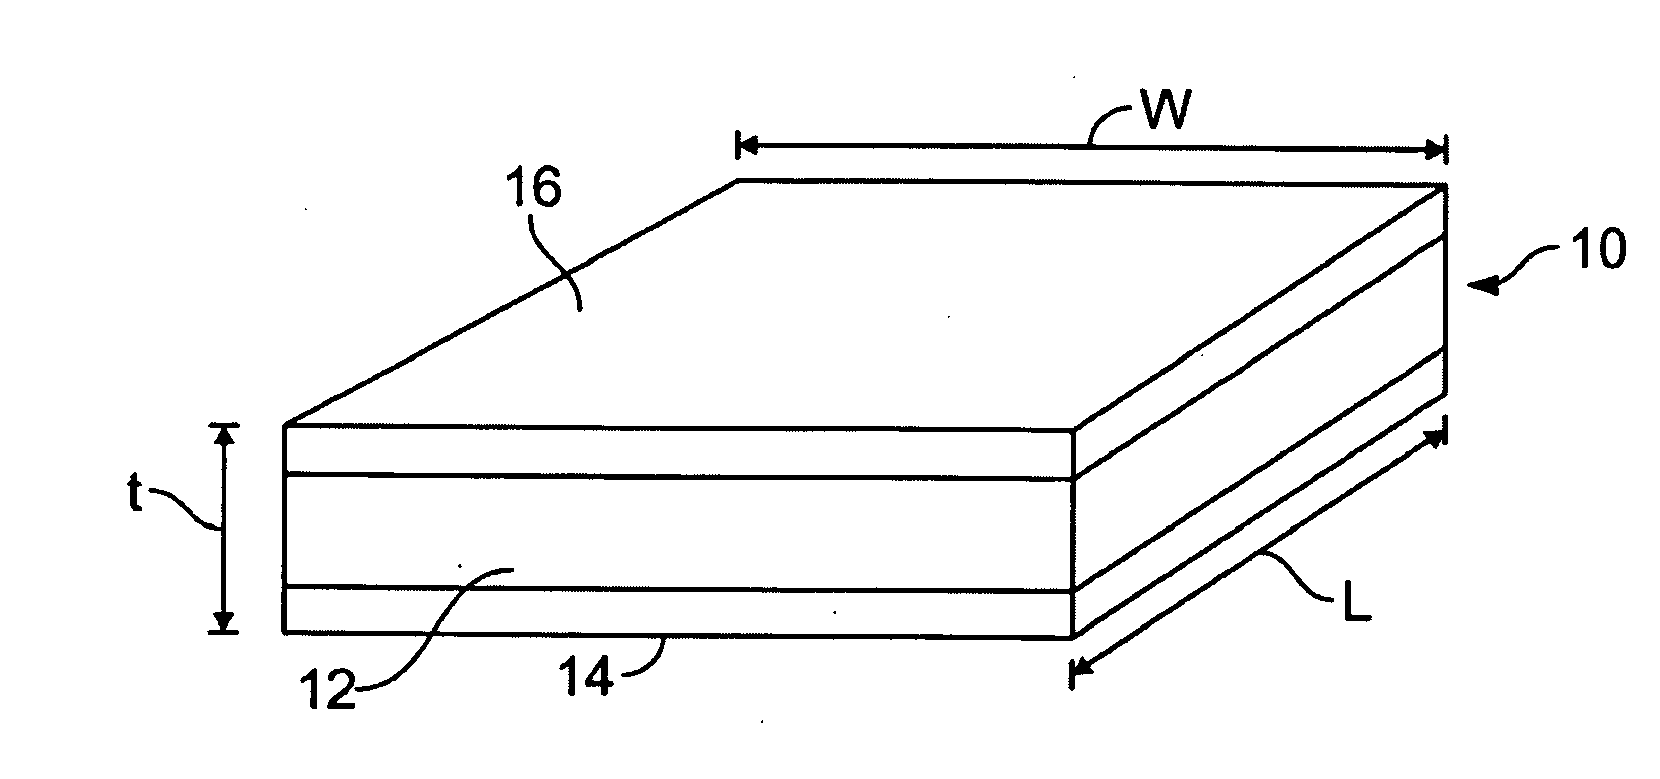 Electroactive polymer transducers